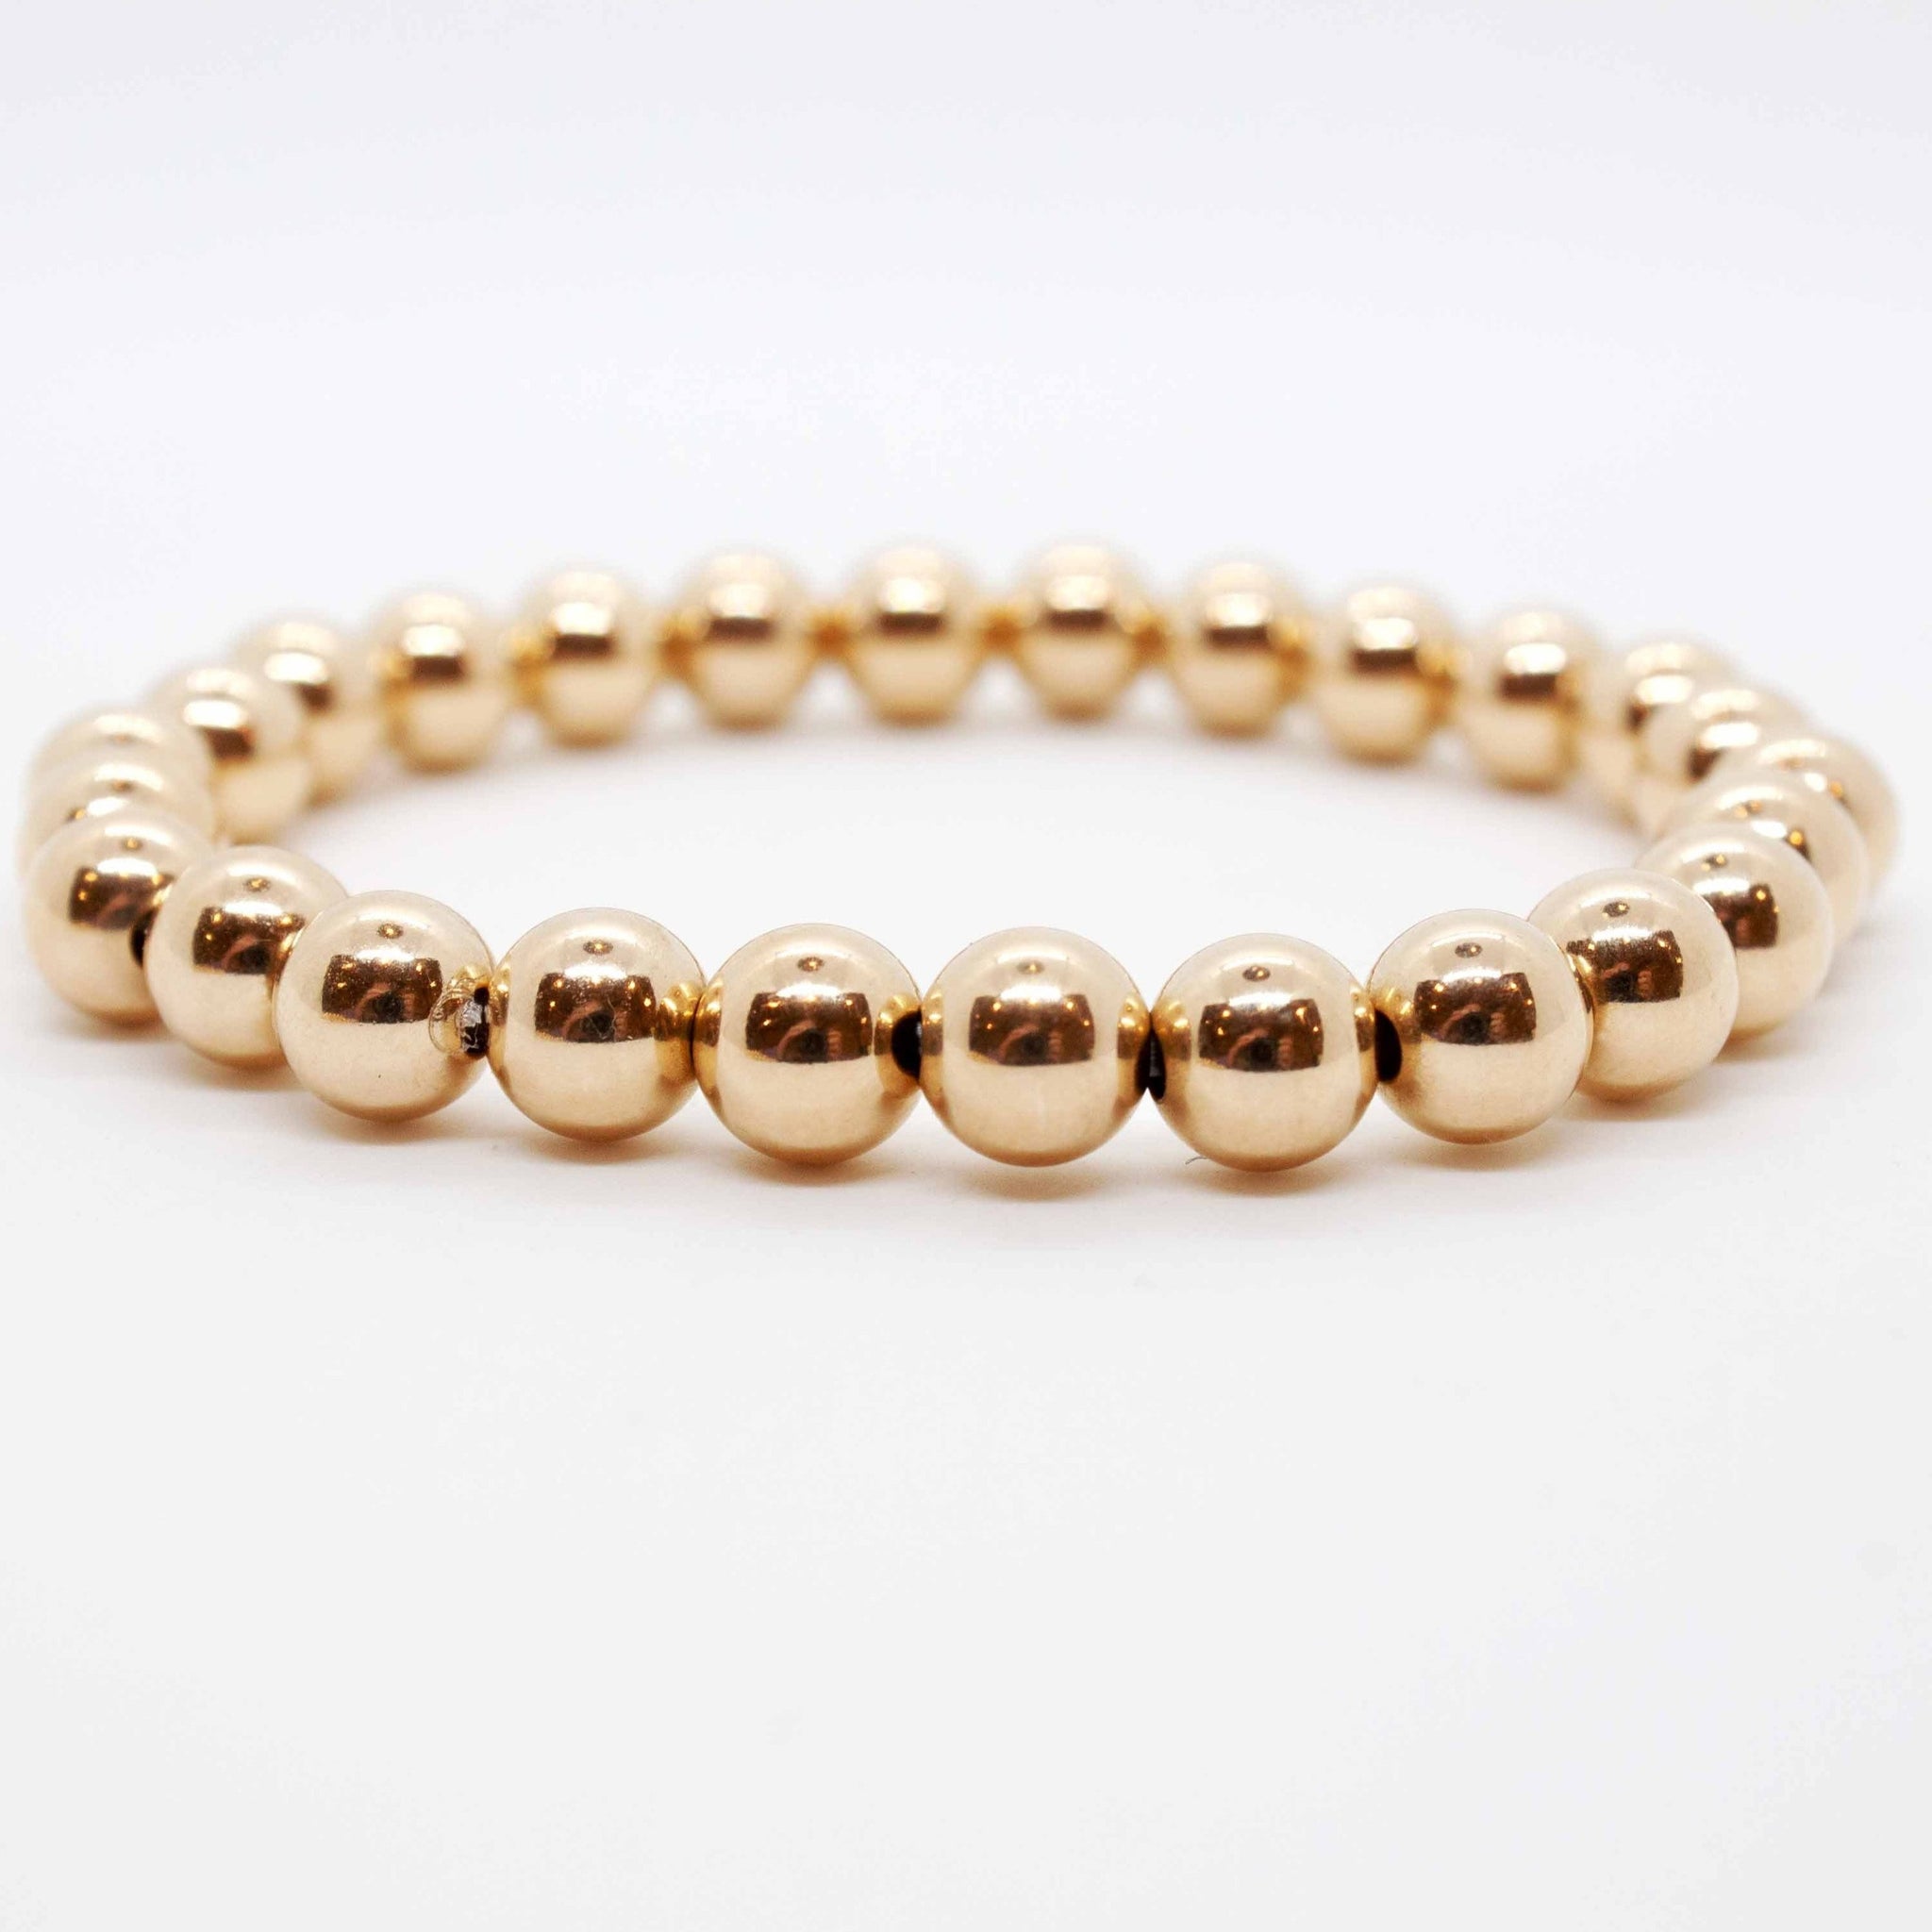 7 inch beaded gold stretchy stacking bracelet.